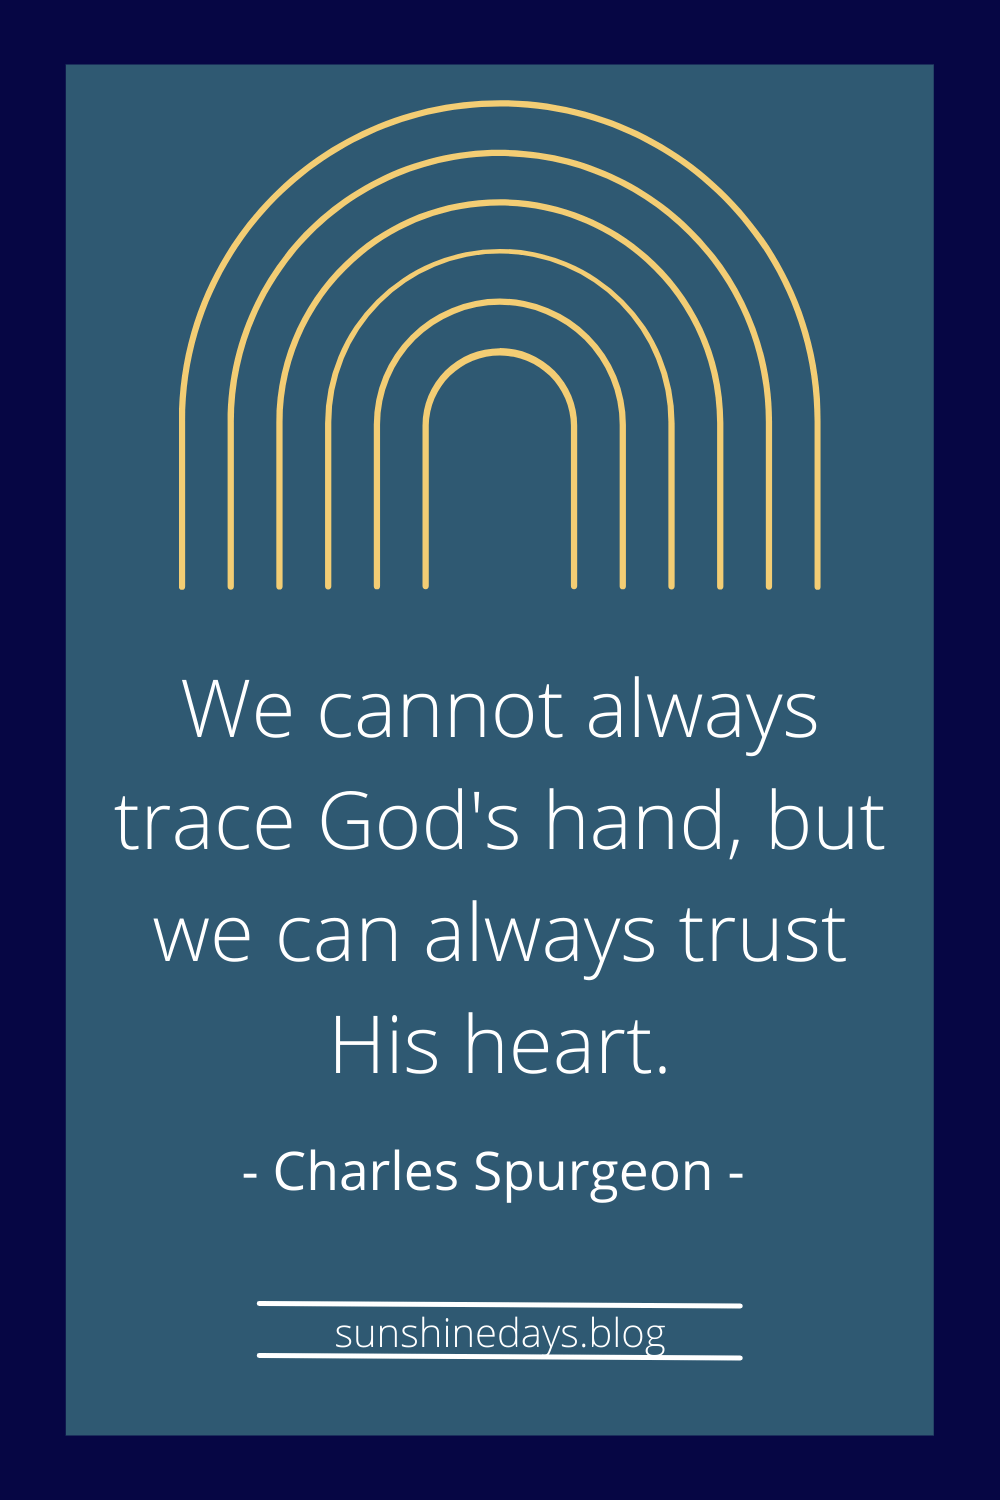 spurgeon quote about trusting God